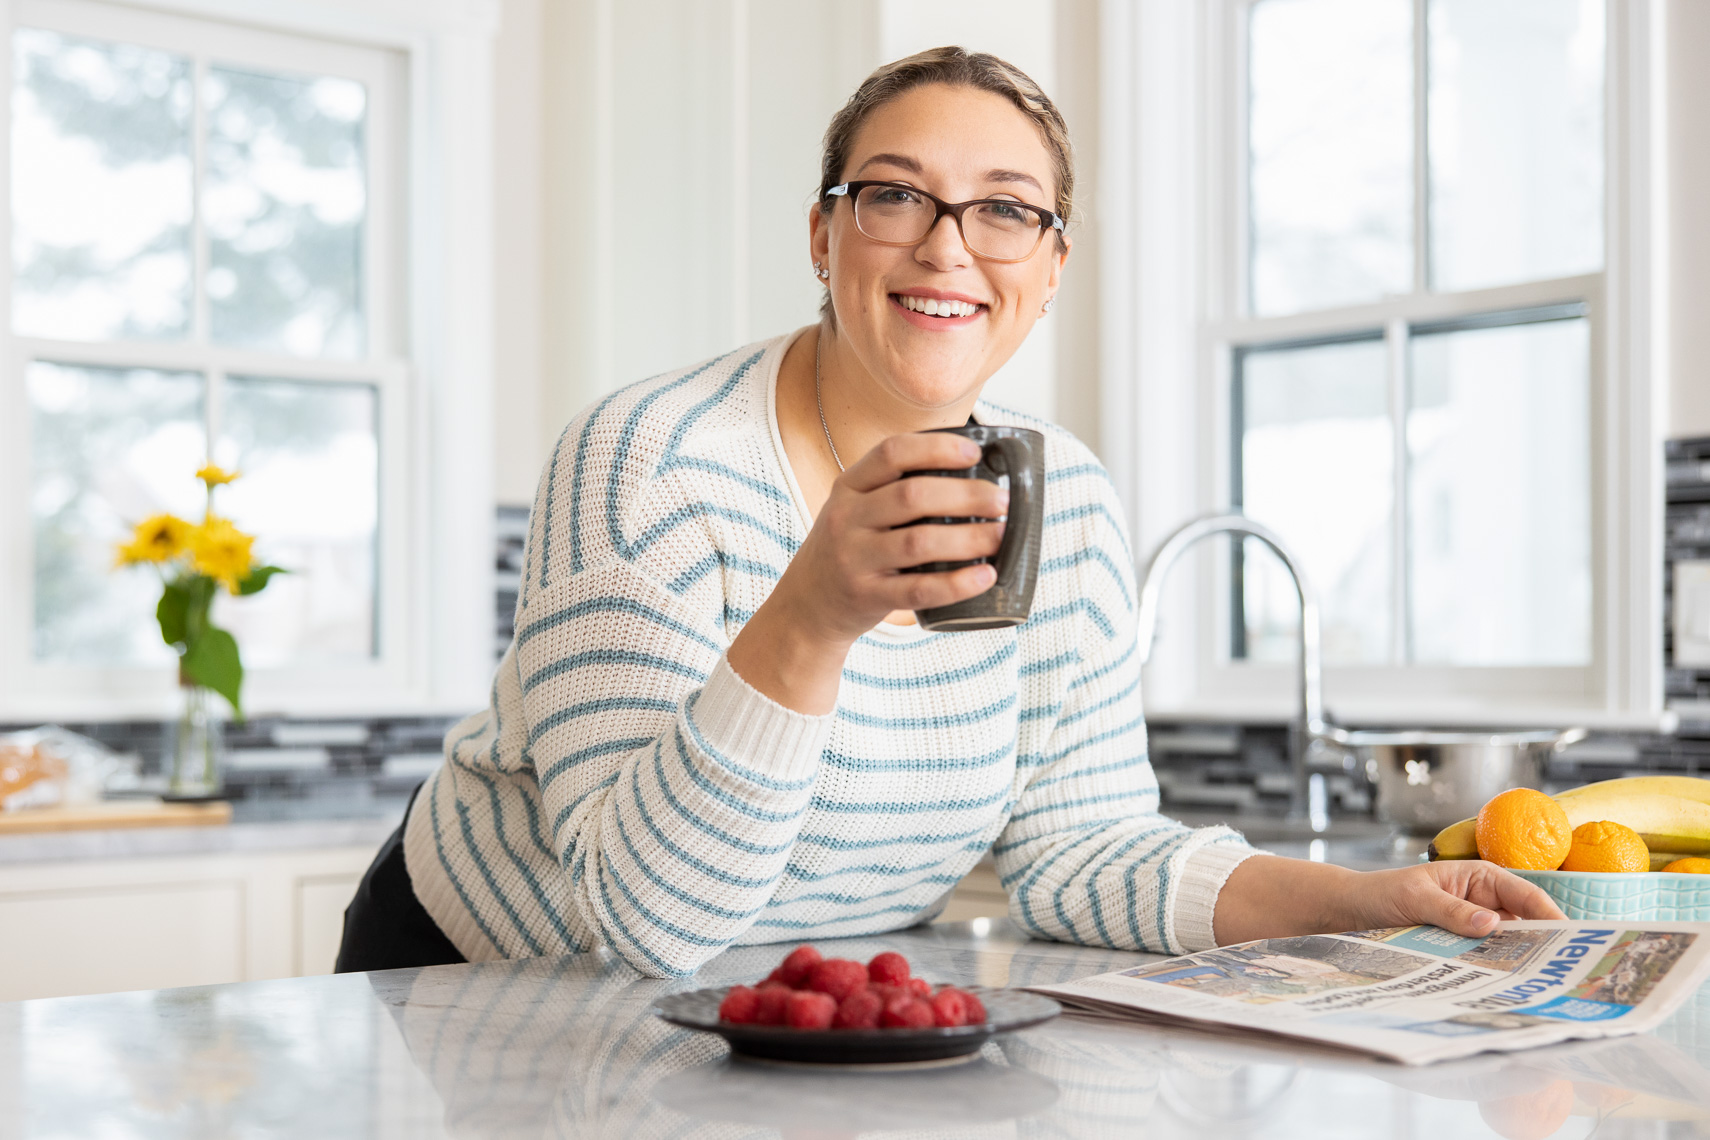 Portrait of a female patient in her kitchen drinking coffee by san francisco based healthcare advertising photographer robert houser